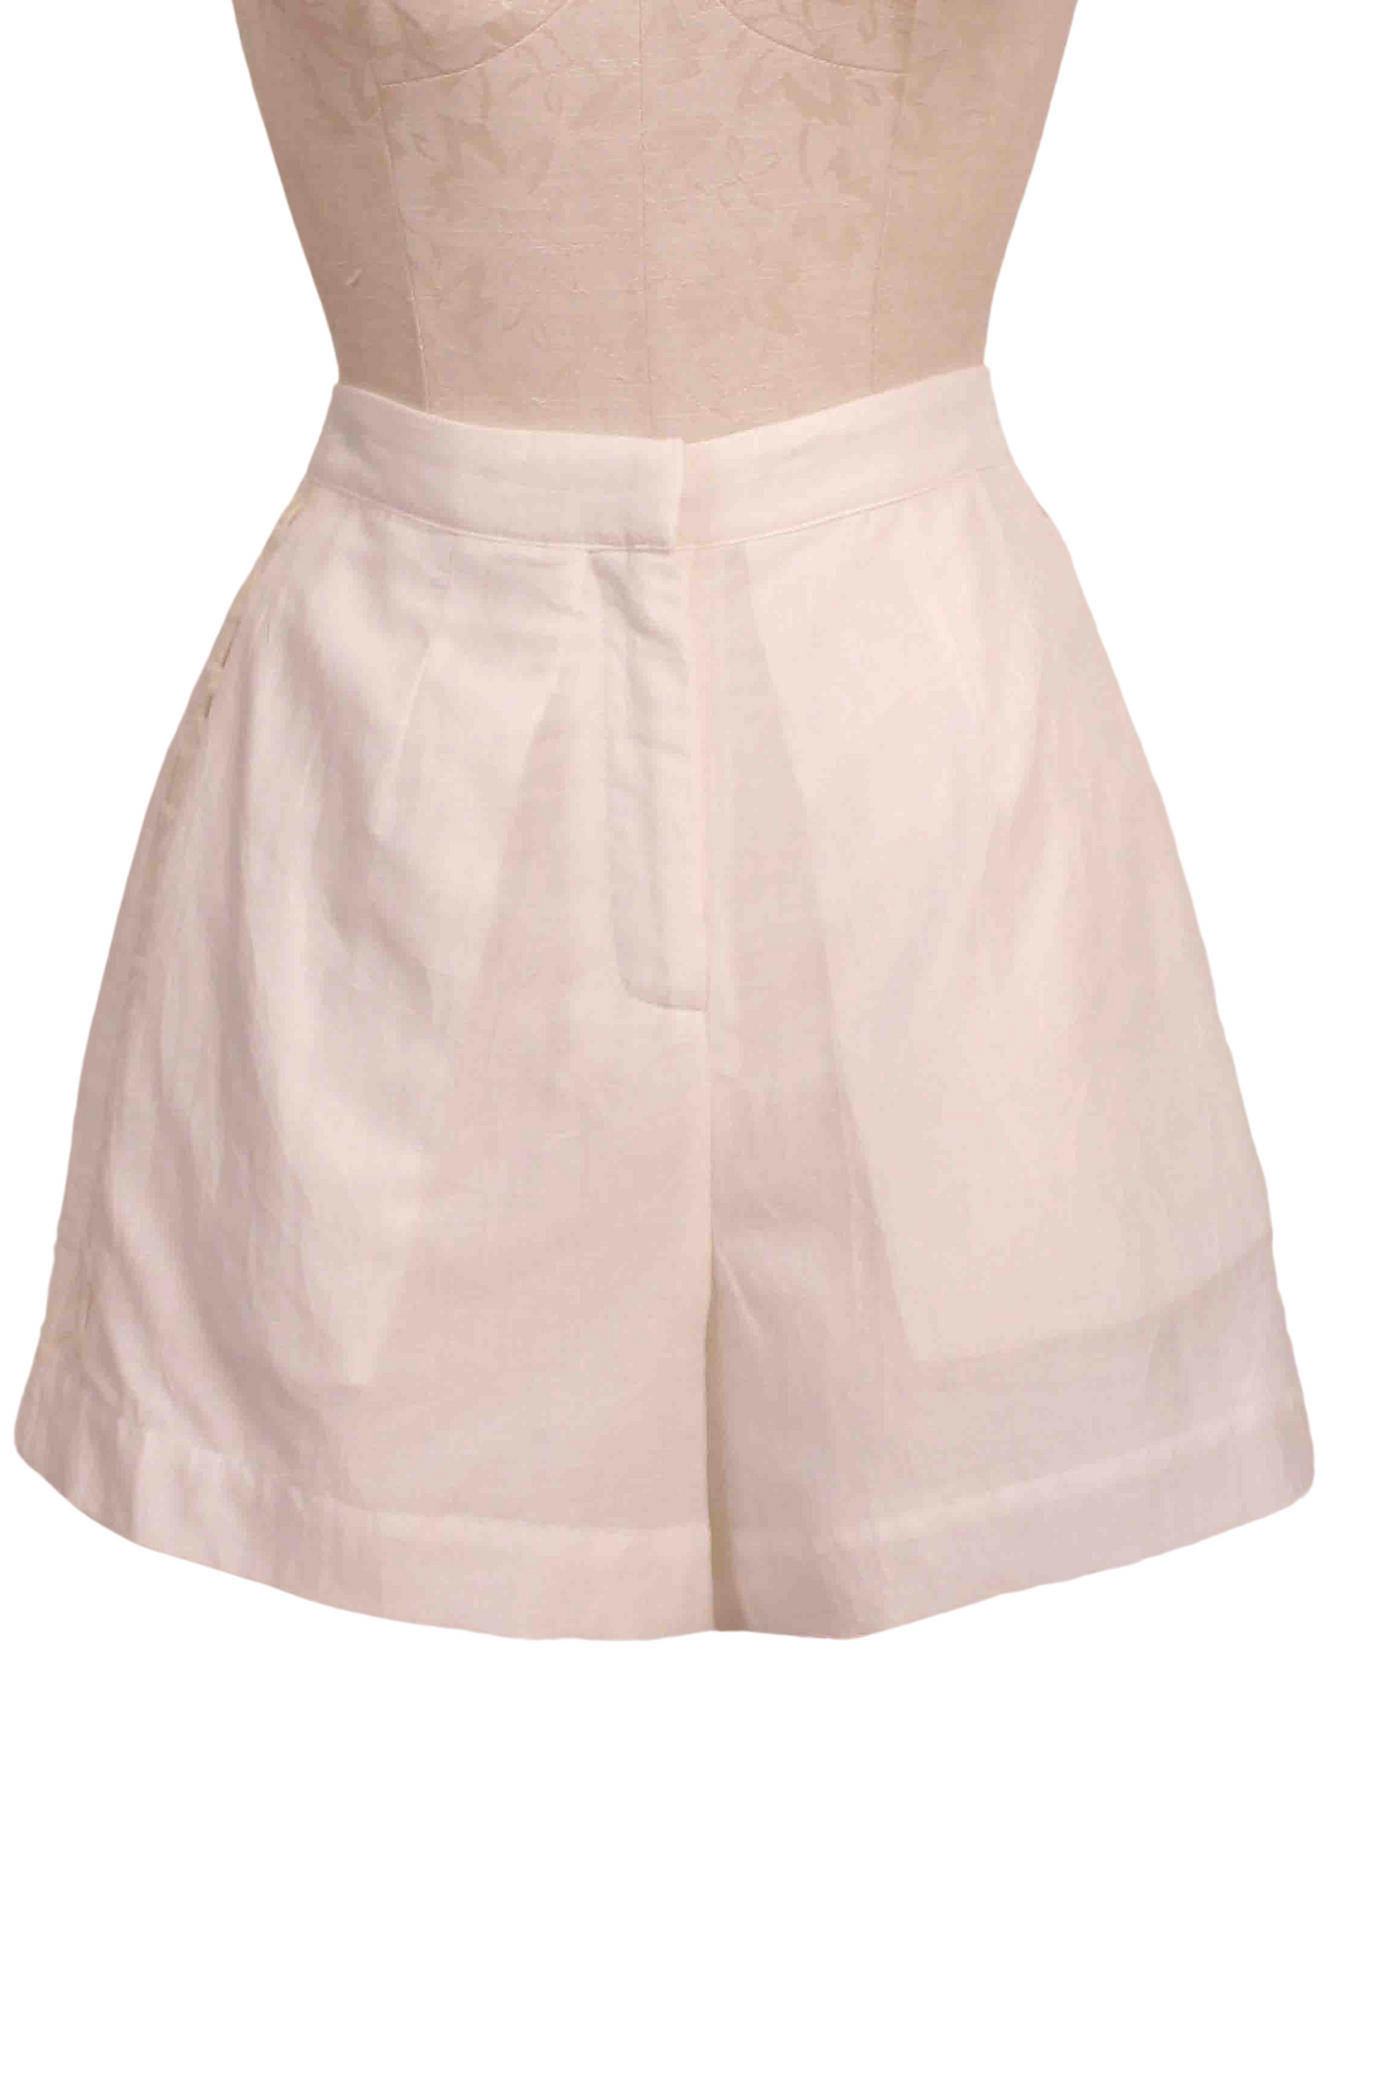 White Paradise Short by Mon Renn with Embroidered sides